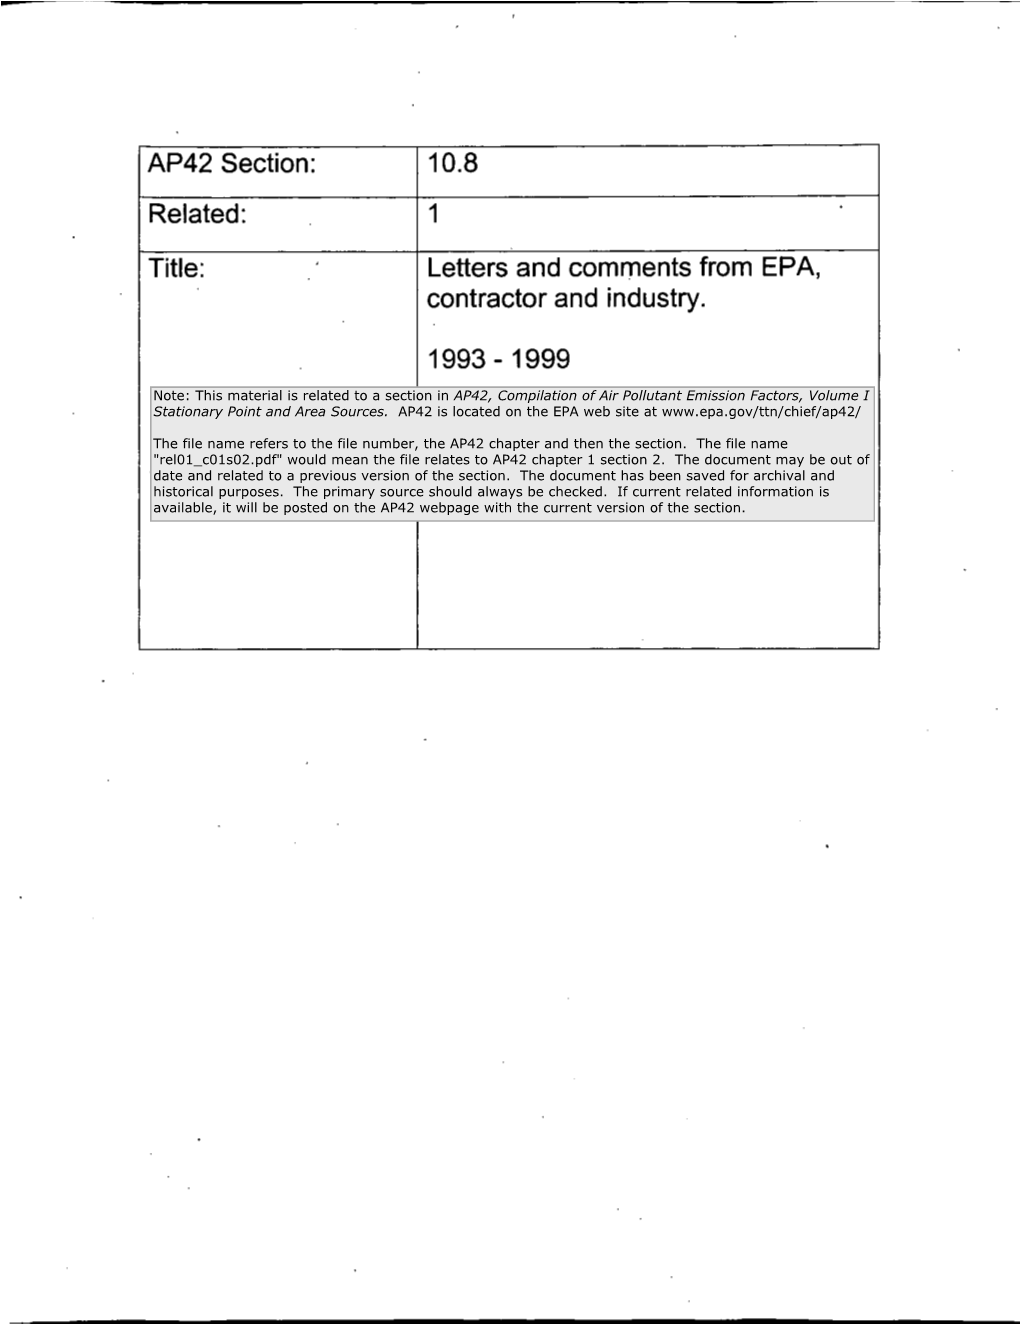 AP42 Section: Related: Title: 10.8 1 Letters and Comments from EPA